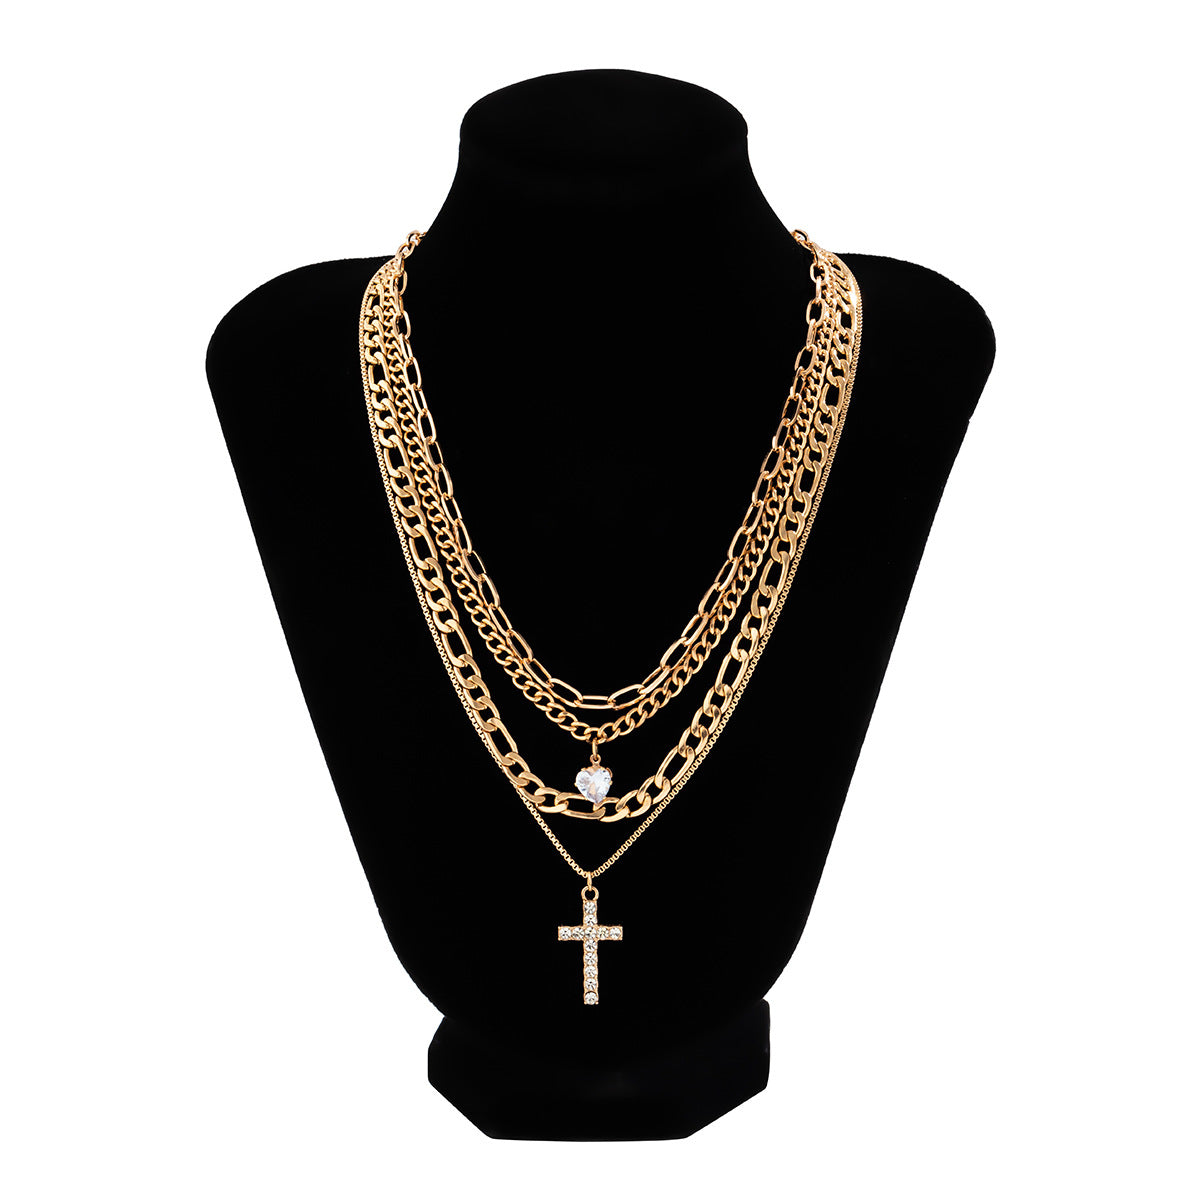 European and American Cross Jewelry Collection with Full Diamond Heart Pendant Necklace